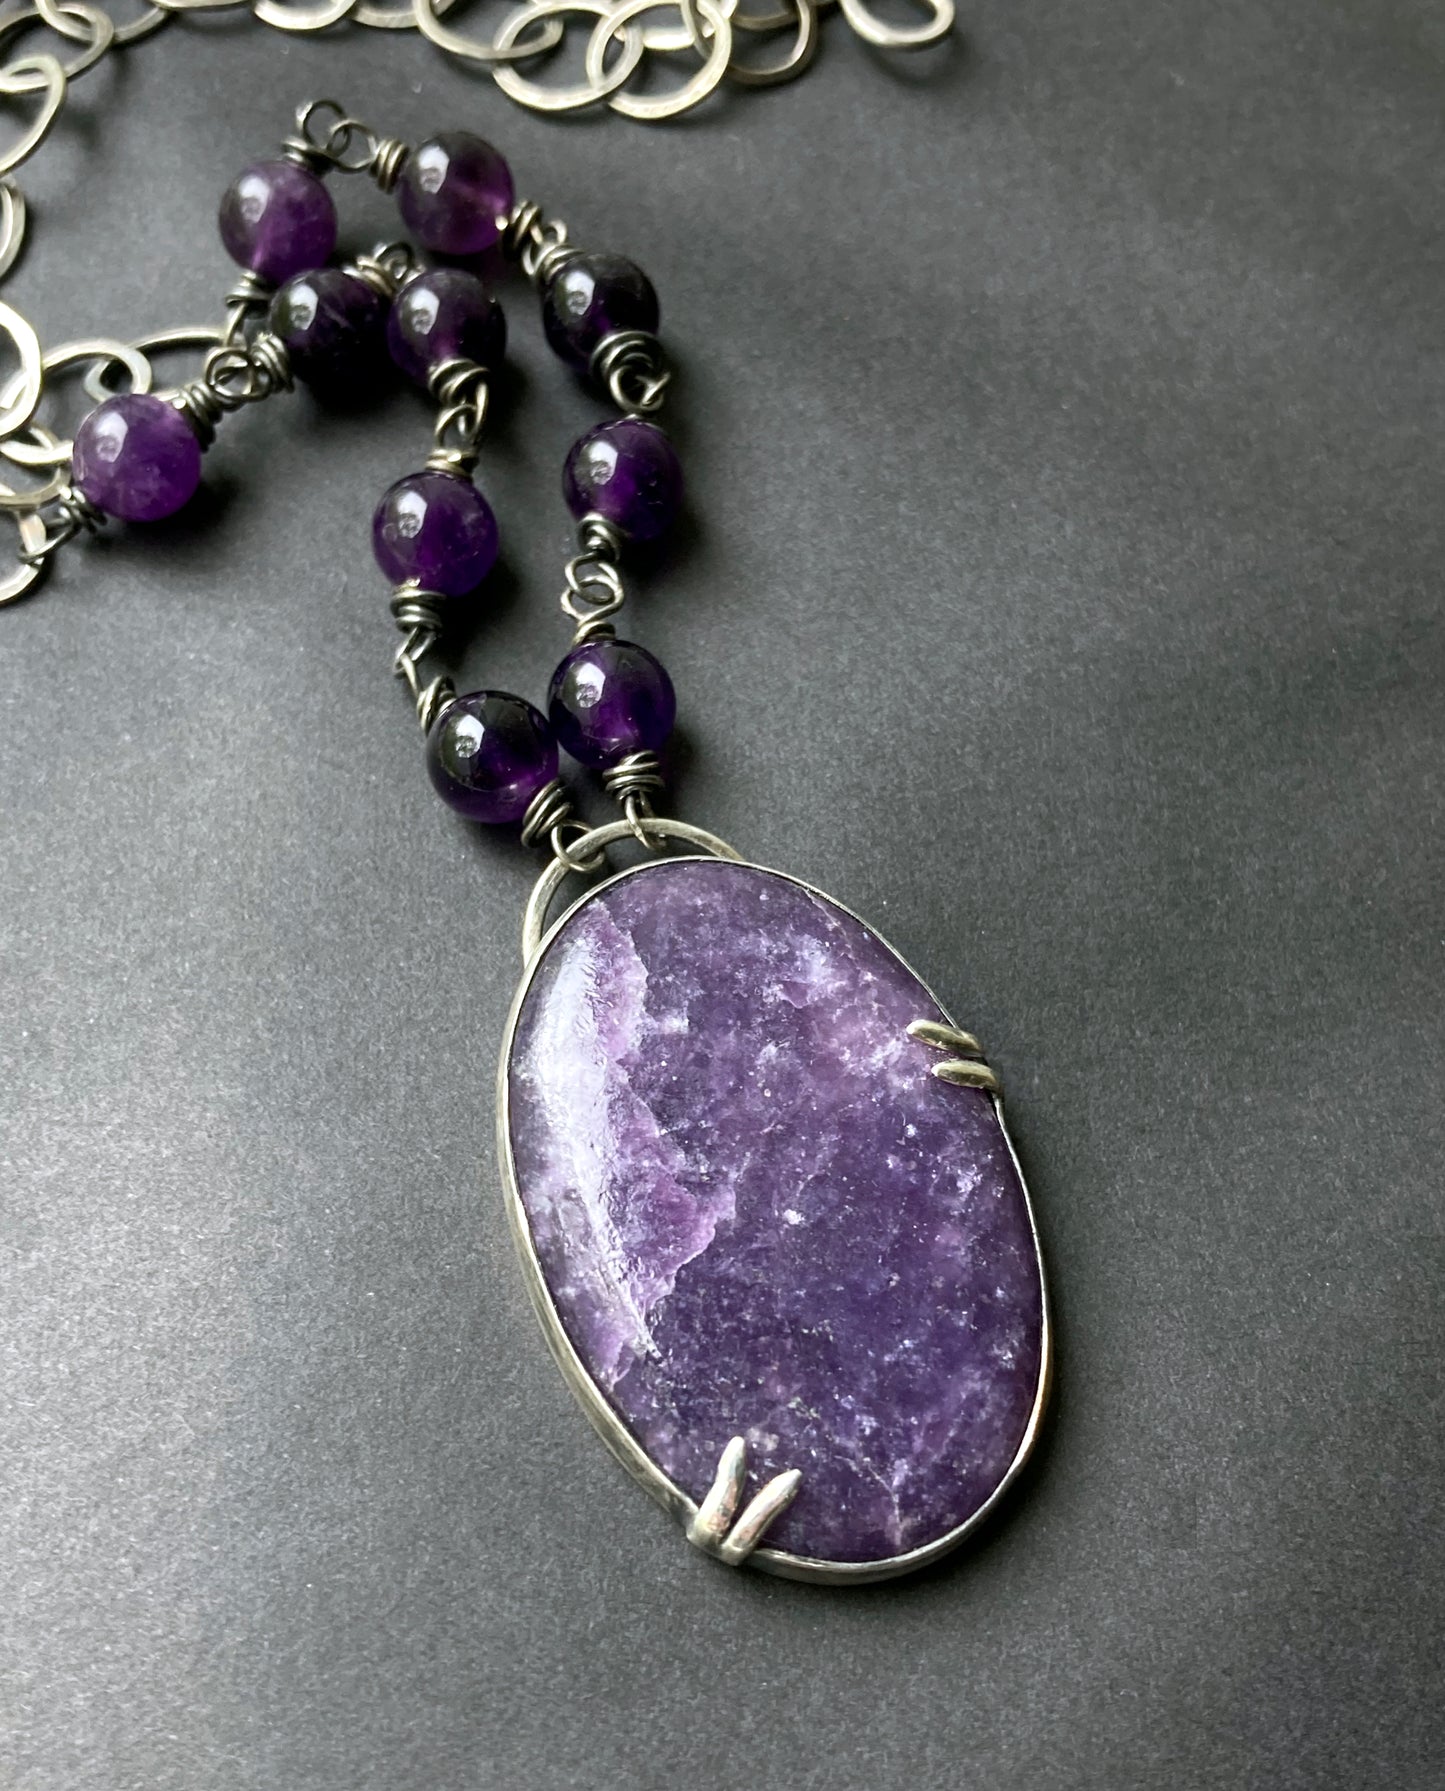 Crocus Flower Lepidolite, Amethyst, and Sterling Silver Necklace with Handmade Large Link Chain